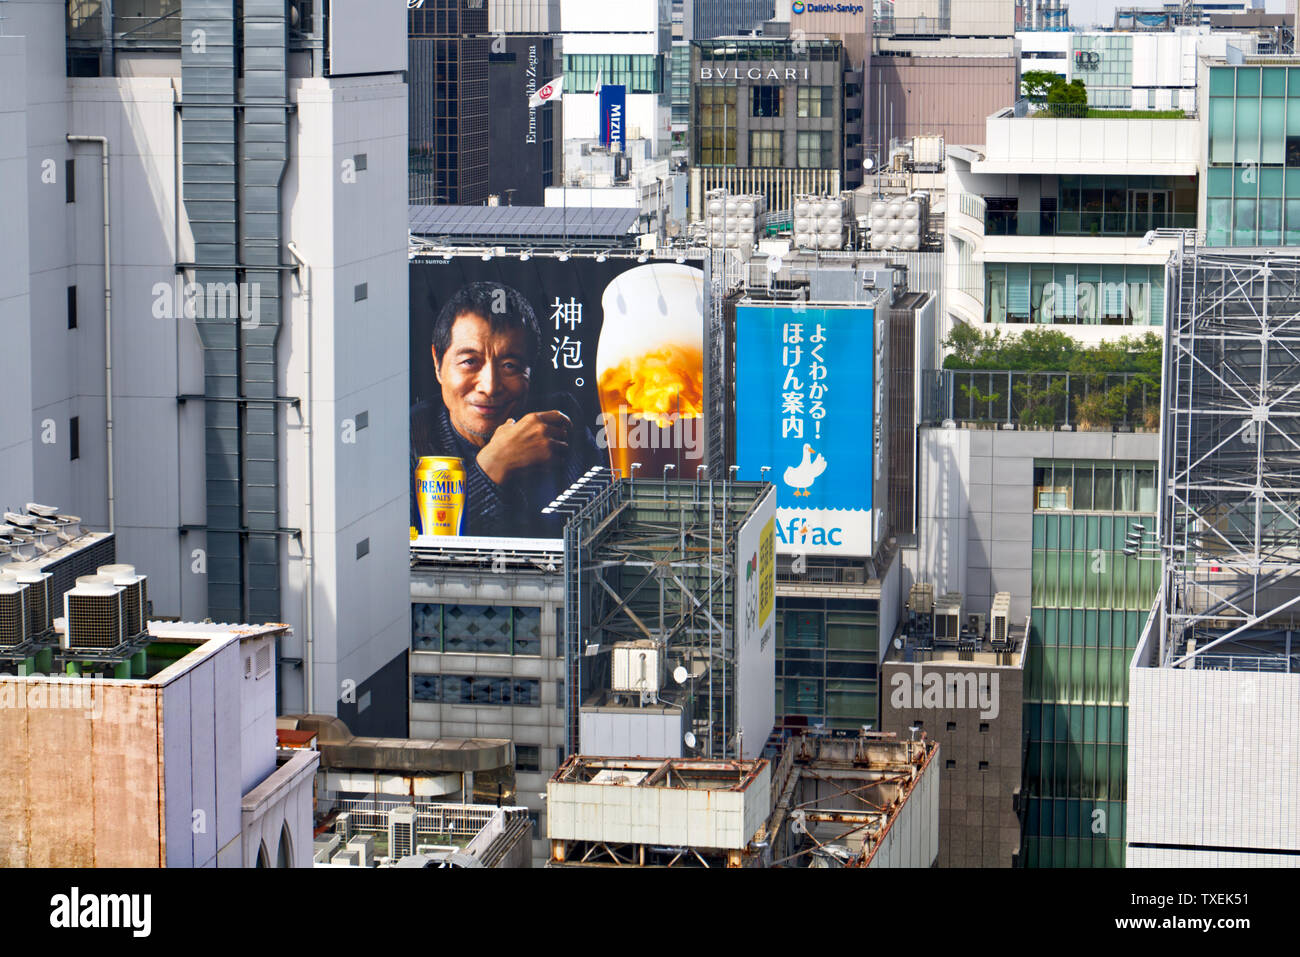 An aerial view of advertising billboards on skyscrapers in the Ginza district of Tokyo, Japan Stock Photo